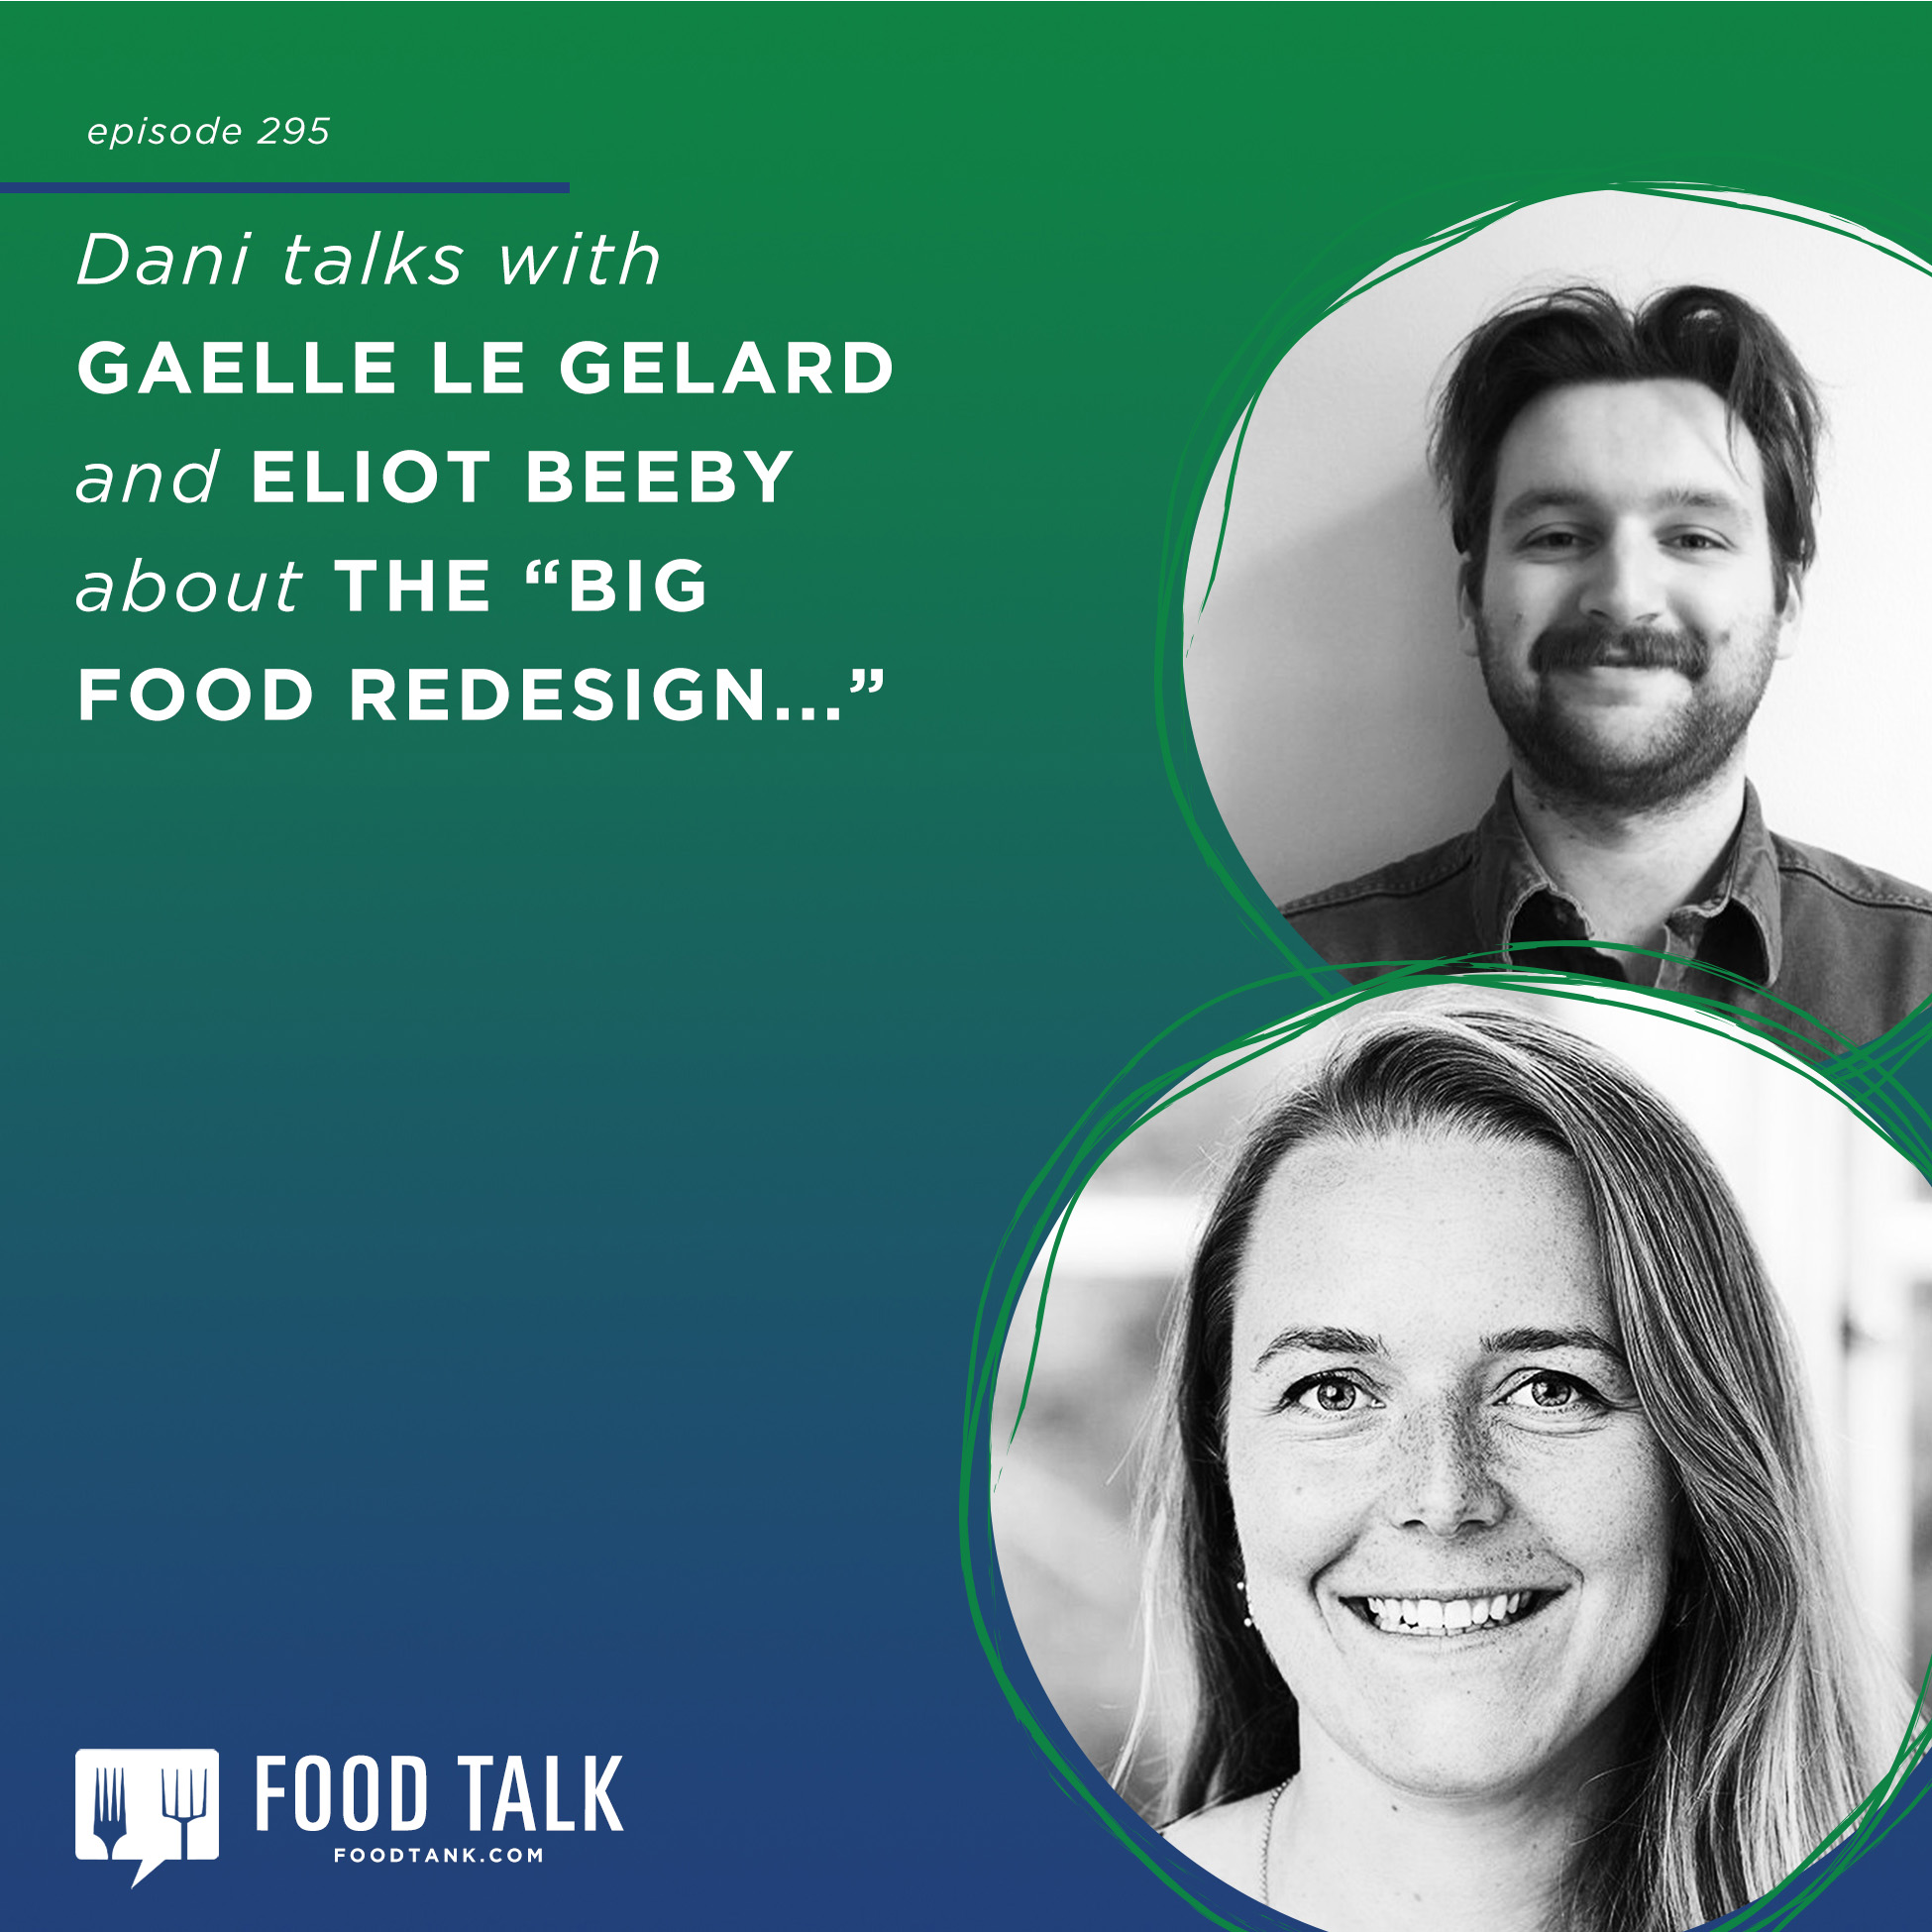 https://podcasts.apple.com/us/podcast/295-gaelle-le-gelard-and-eliot-beeby-on-redesigning/id1434128568?i=1000545144734